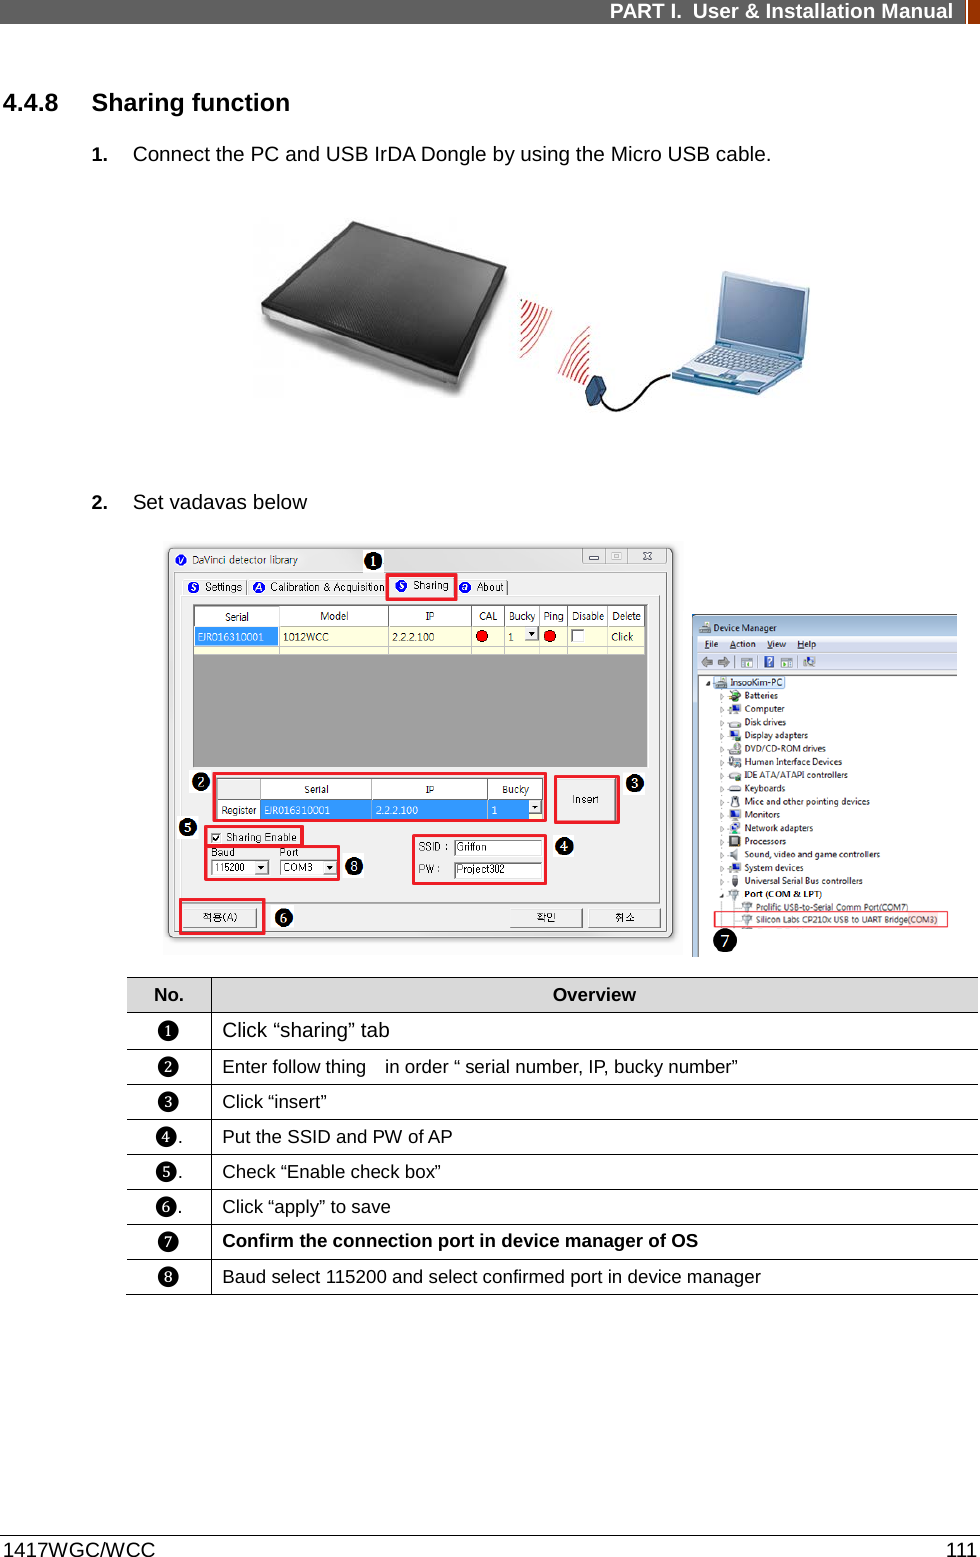 PART I. User &amp; Installation Manual  1417WGC/WCC 111 4.4.8 Sharing function 1. Connect the PC and USB IrDA Dongle by using the Micro USB cable.  2. Set vadavas below  No. Overview ❶ Click “sharing” tab ❷ Enter follow thing    in order “ serial number, IP, bucky number” ❸ Click “insert” ❹.  Put the SSID and PW of AP ❺.  Check “Enable check box” ❻. Click “apply” to save ❼ Confirm the connection port in device manager of OS ❽ Baud select 115200 and select confirmed port in device manager     